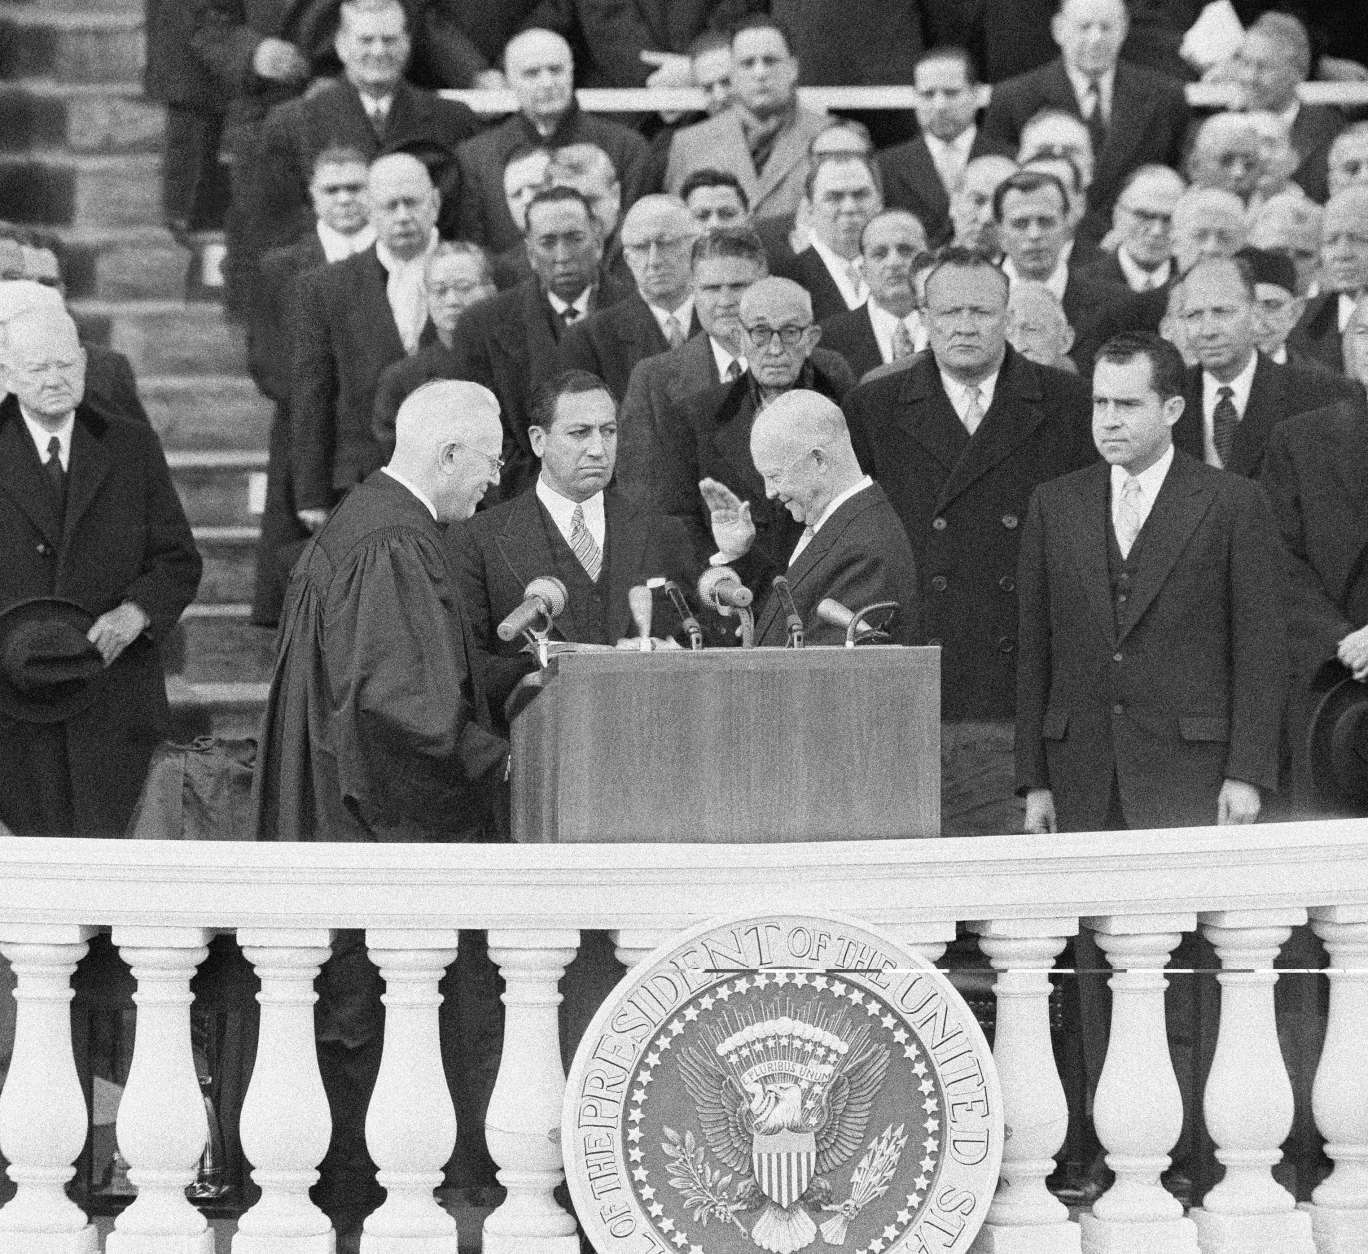 President Dwight D. Eisenhower was all smiles as he lowered his hand for a handshake with Chief Justice Earl Warren at end of public oath-taking for second term of office at Capitol in Washington, Jan. 21, 1957. In center is John Fey, clerk of the Supreme Court, who held Bible for the ceremony. (AP Photo)